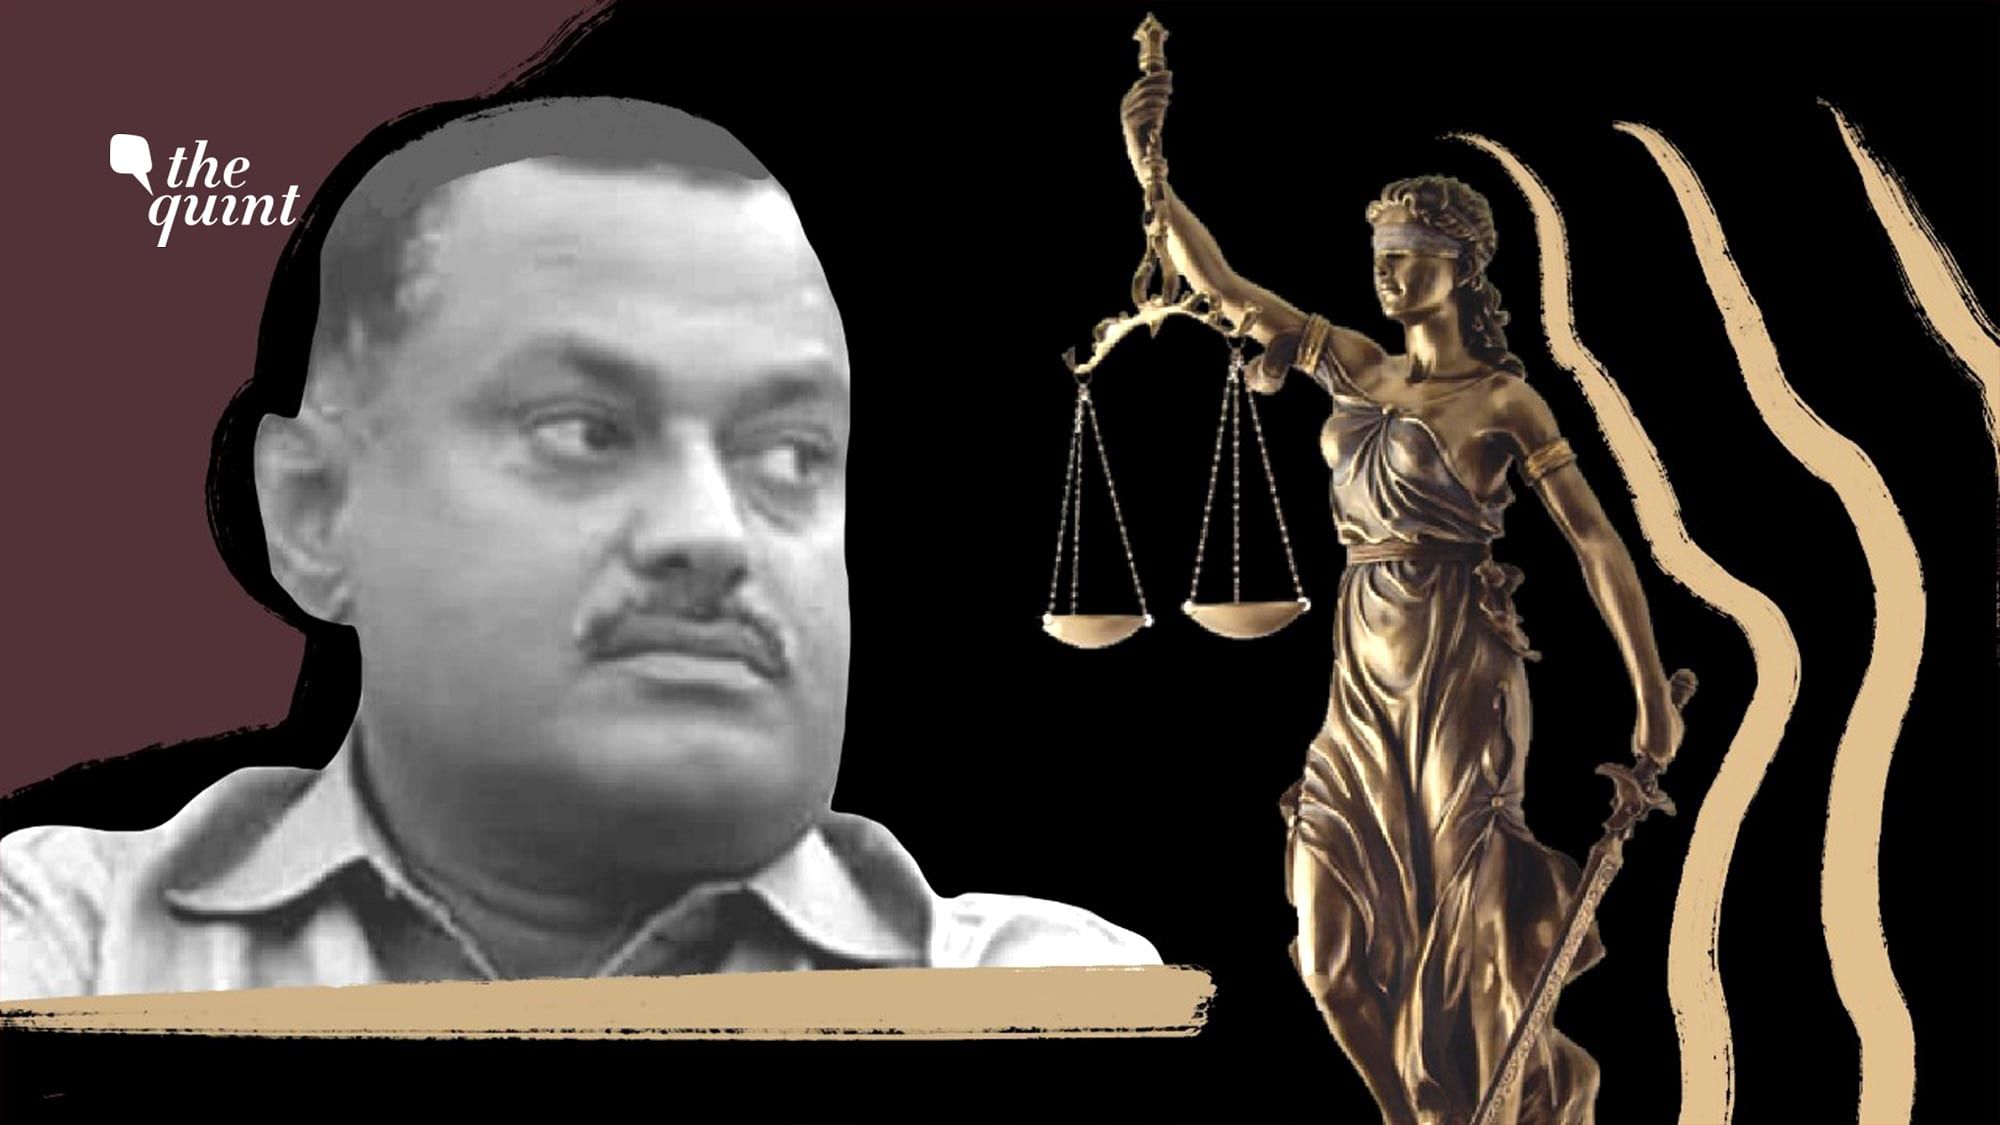 <b>Vikas Dubey was much needed alive. That it did not happen is a severe indictment of the criminal justice system.</b>